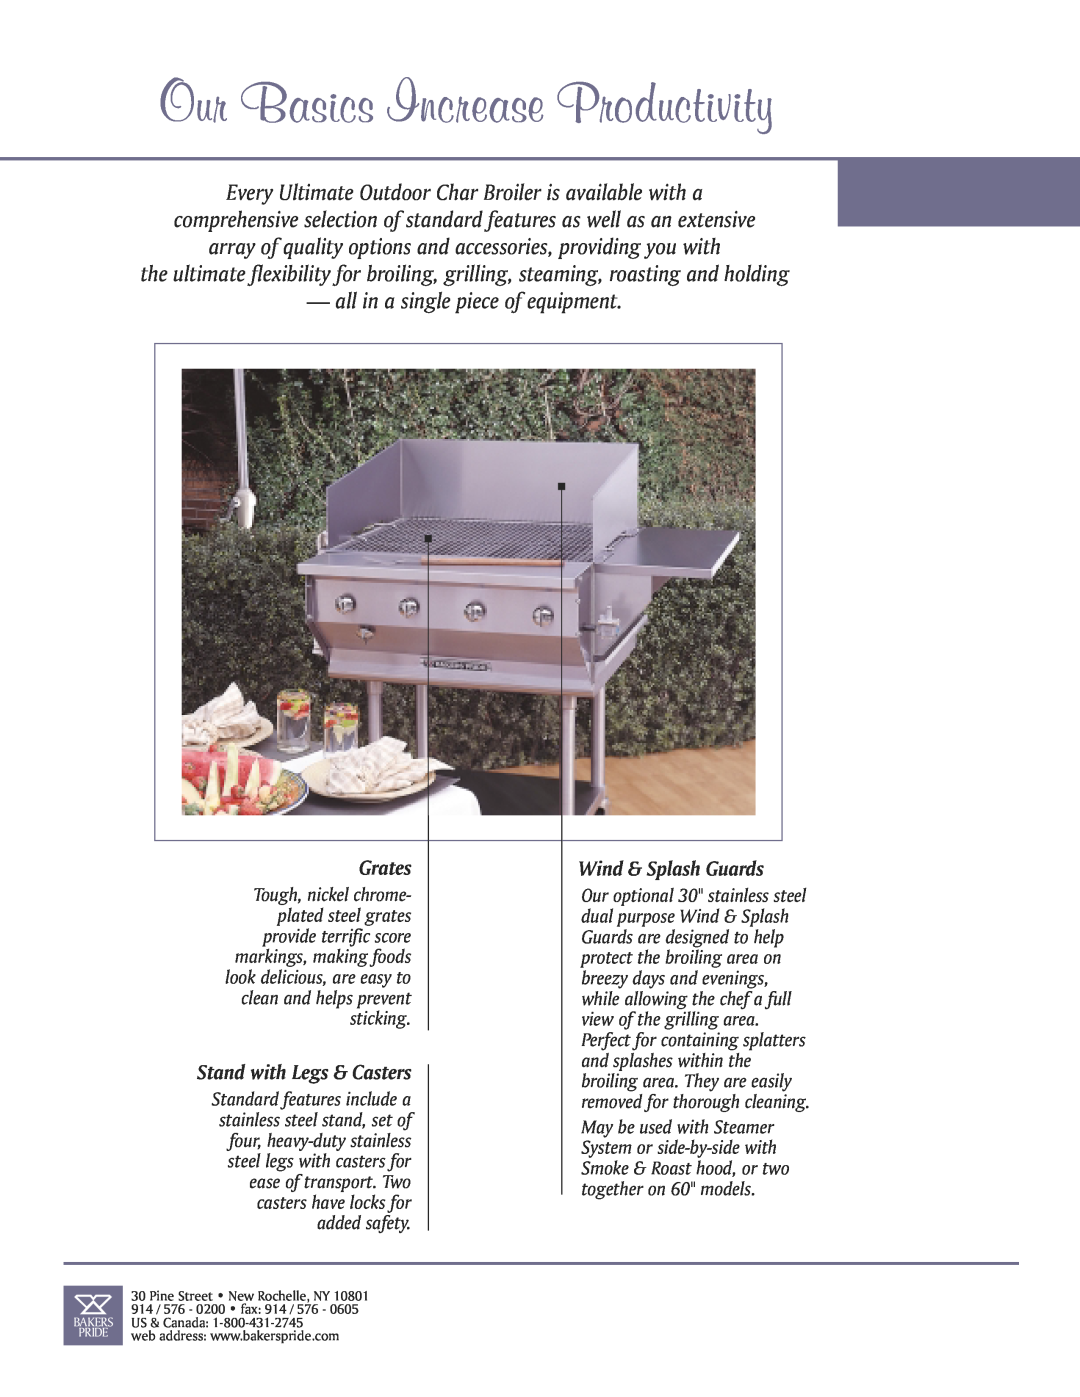 Bakers Pride Oven CBBQ-60S-CP Our Basics Increase Productivity, Grates, Stand with Legs & Casters, Wind & Splash Guards 